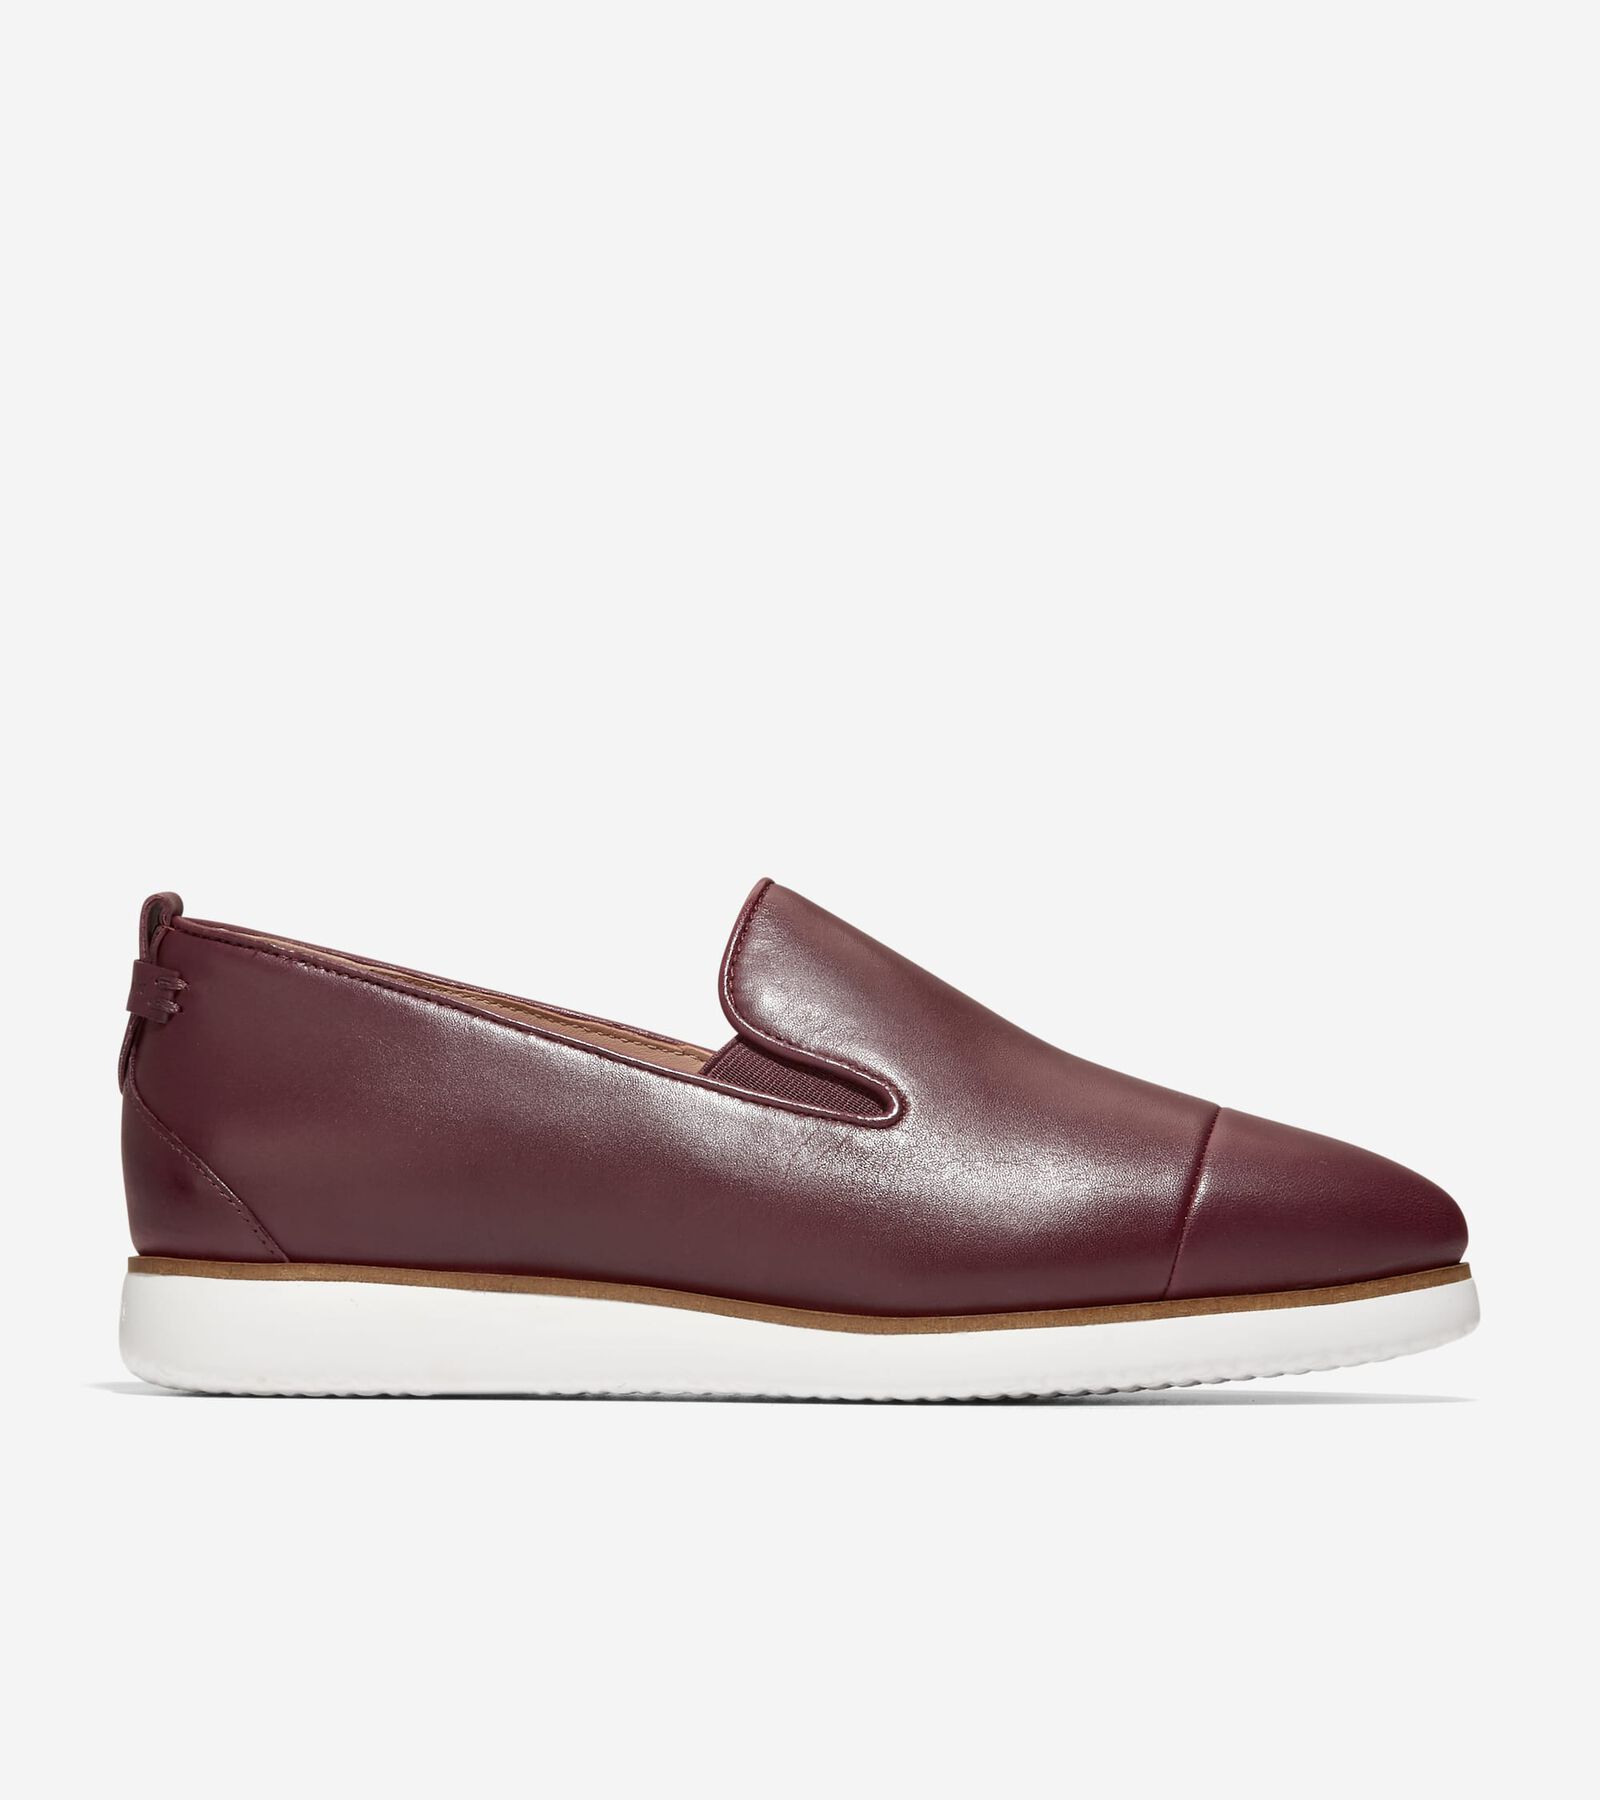 COLE HAAN COLE HAAN GRAND AMBITION SLIP-ON LOAFER